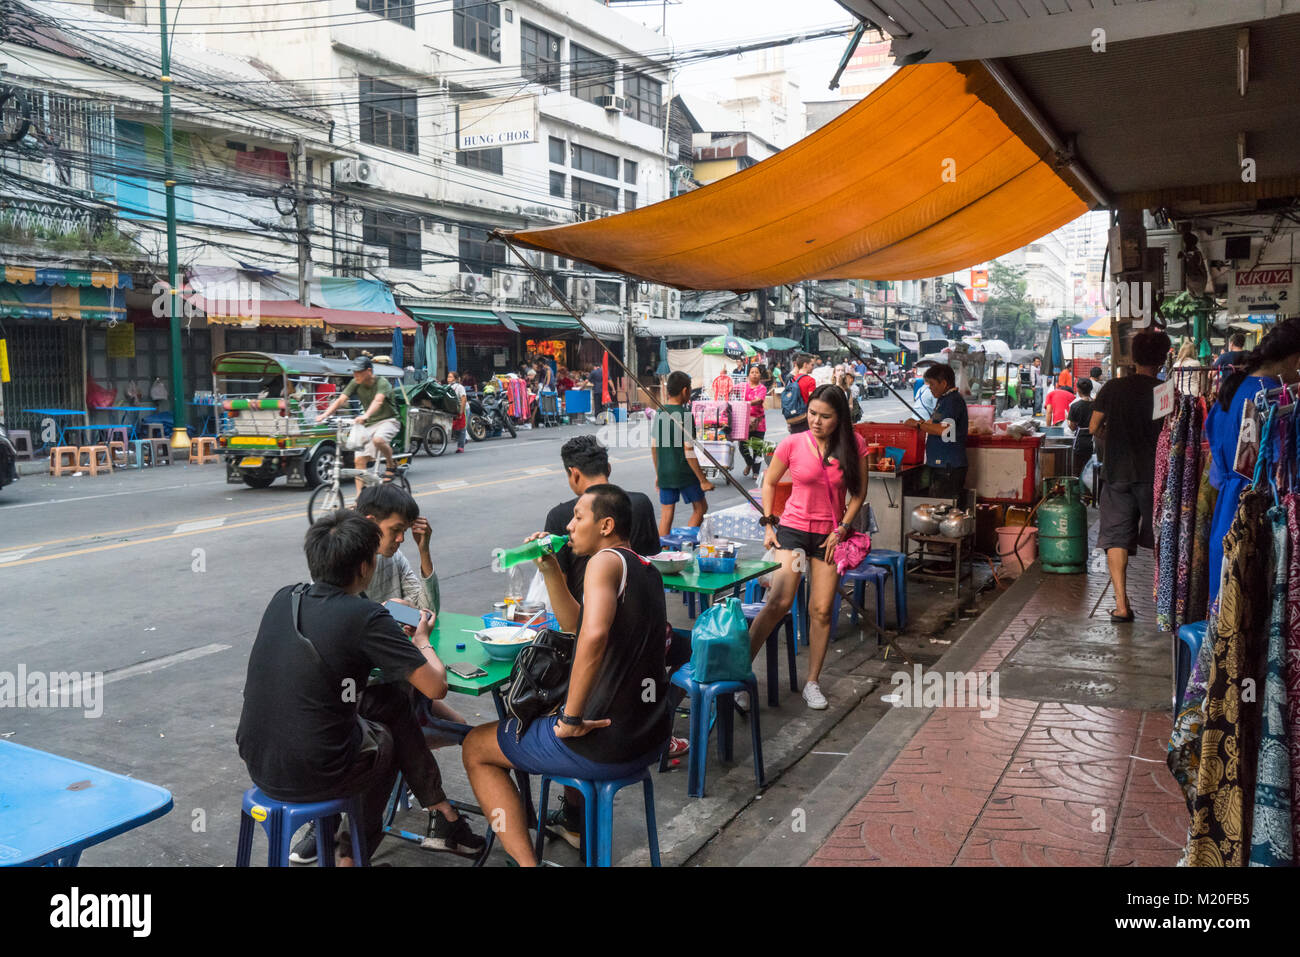 People eating on the street in Bangkok, Thailand Stock Photo